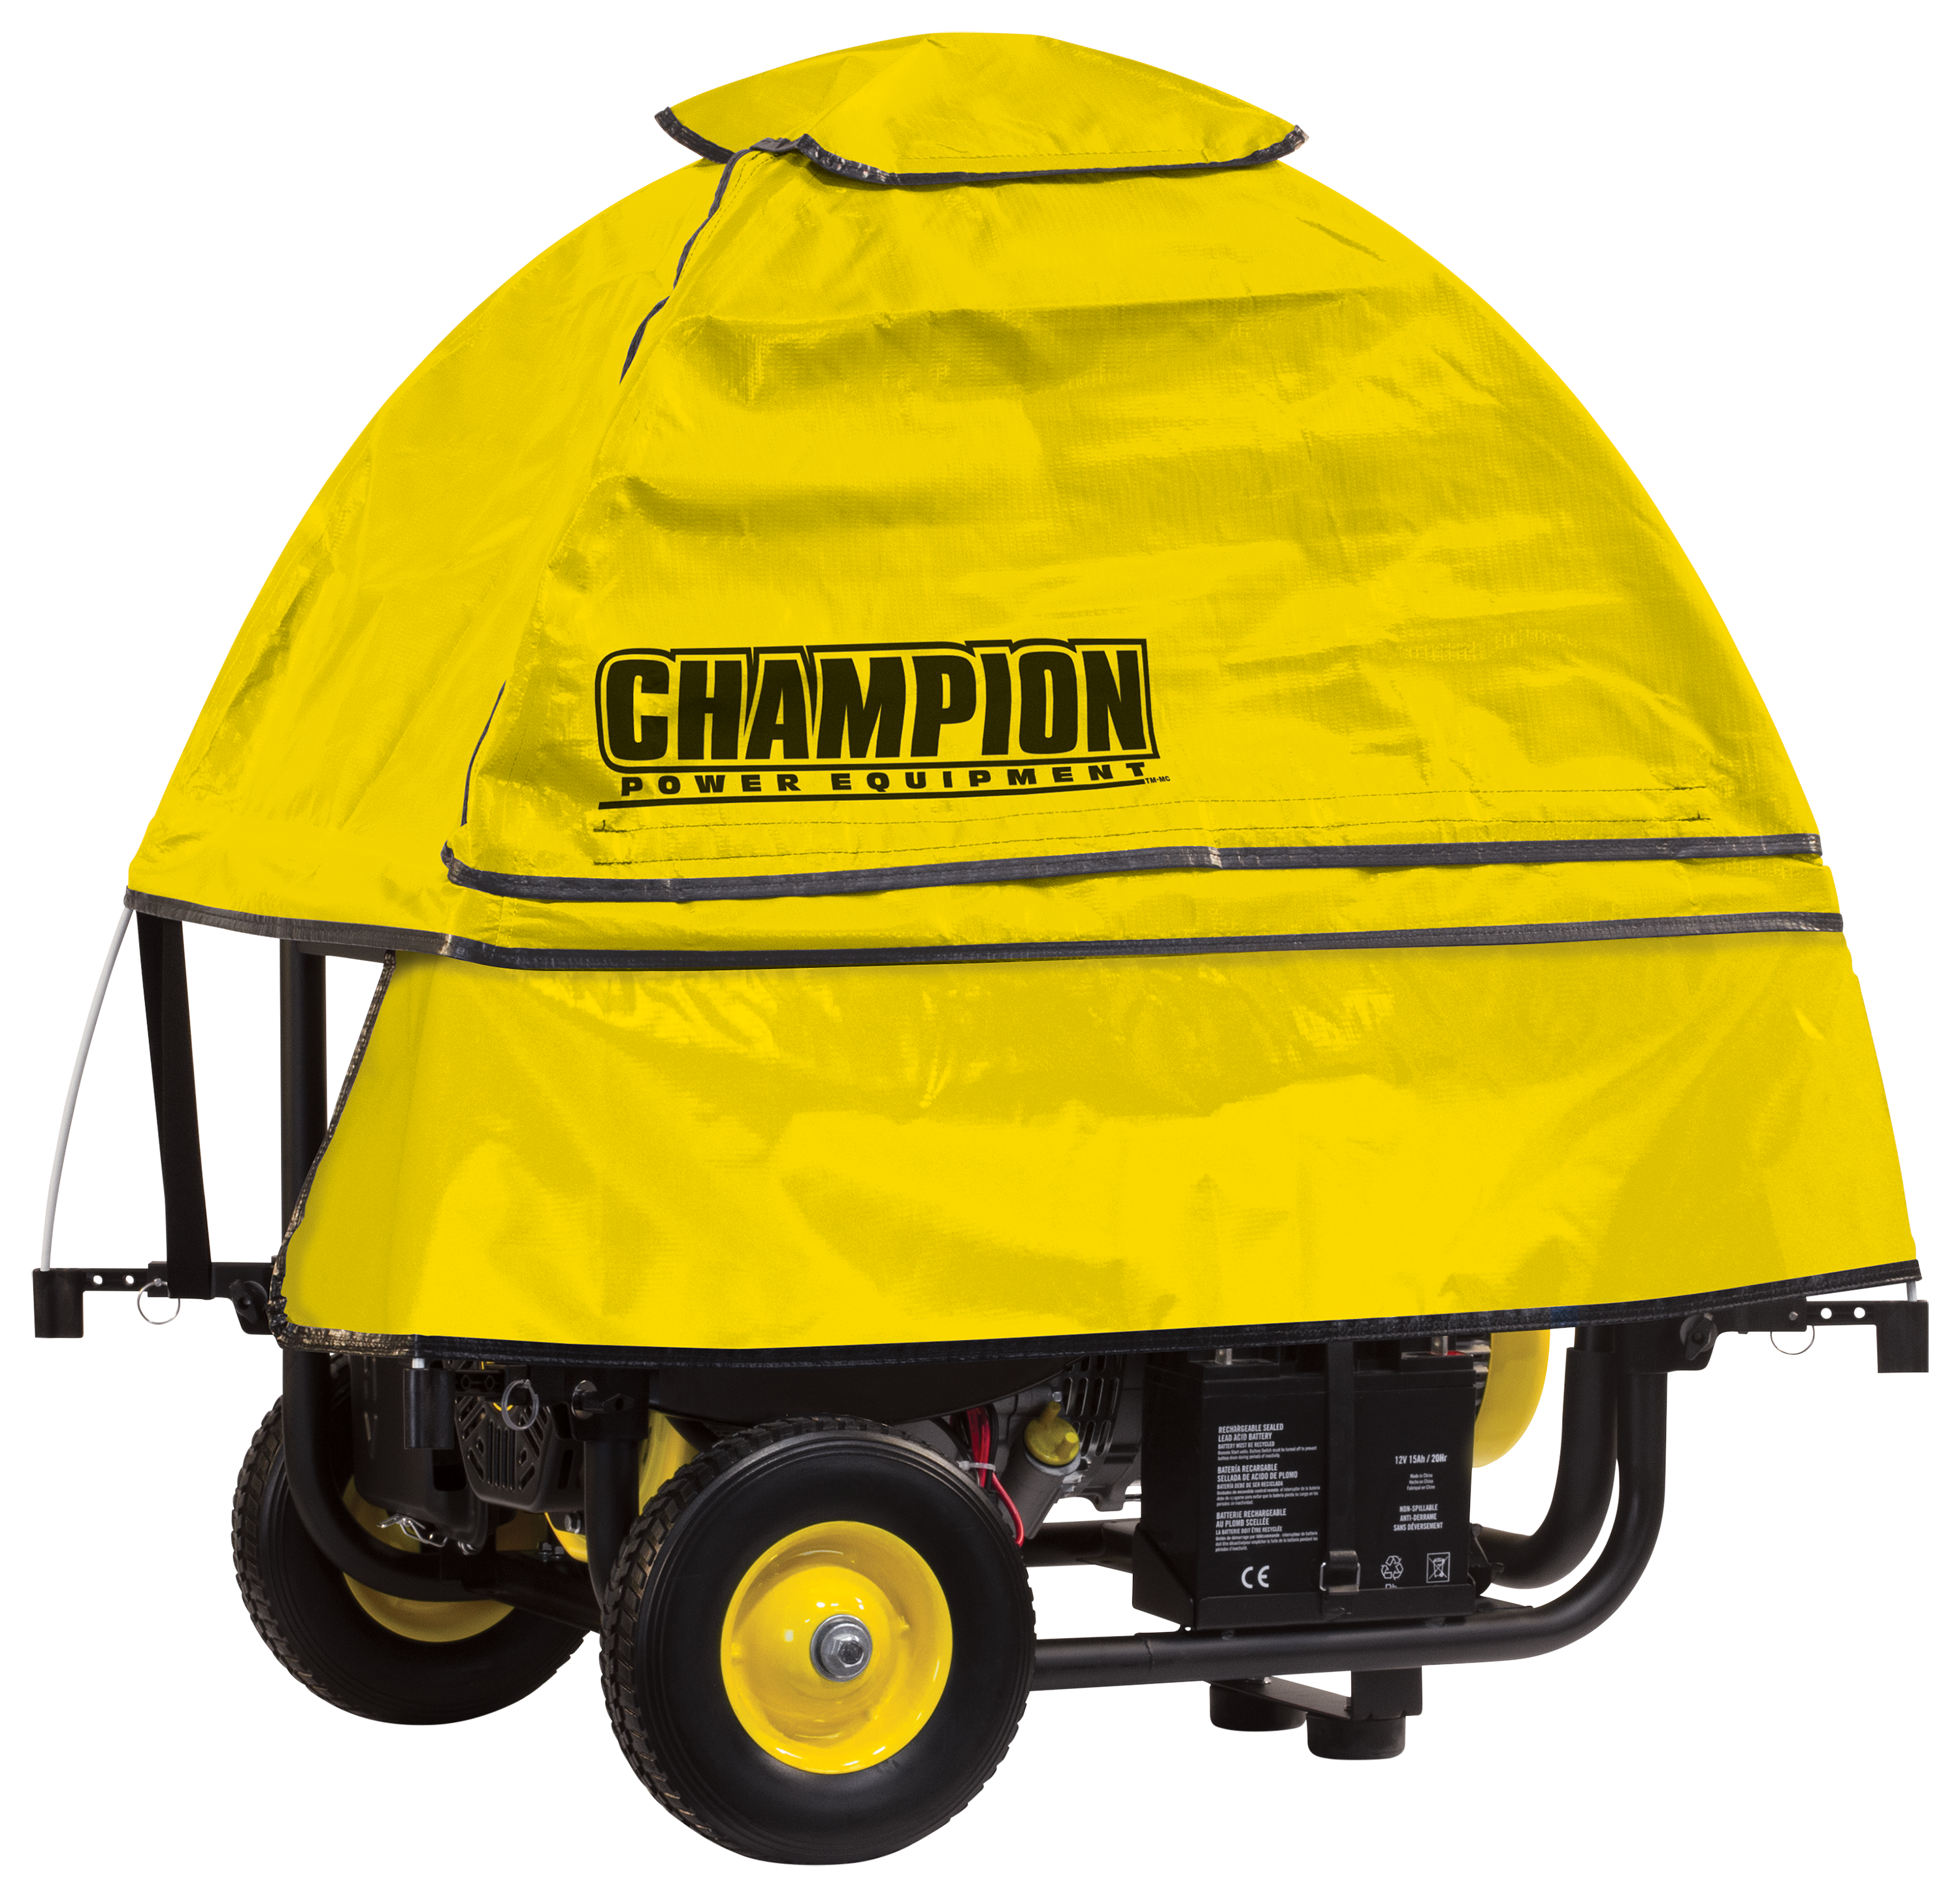 Champion Power Equipment Storm Shield Portable Generator Cover by GenTent